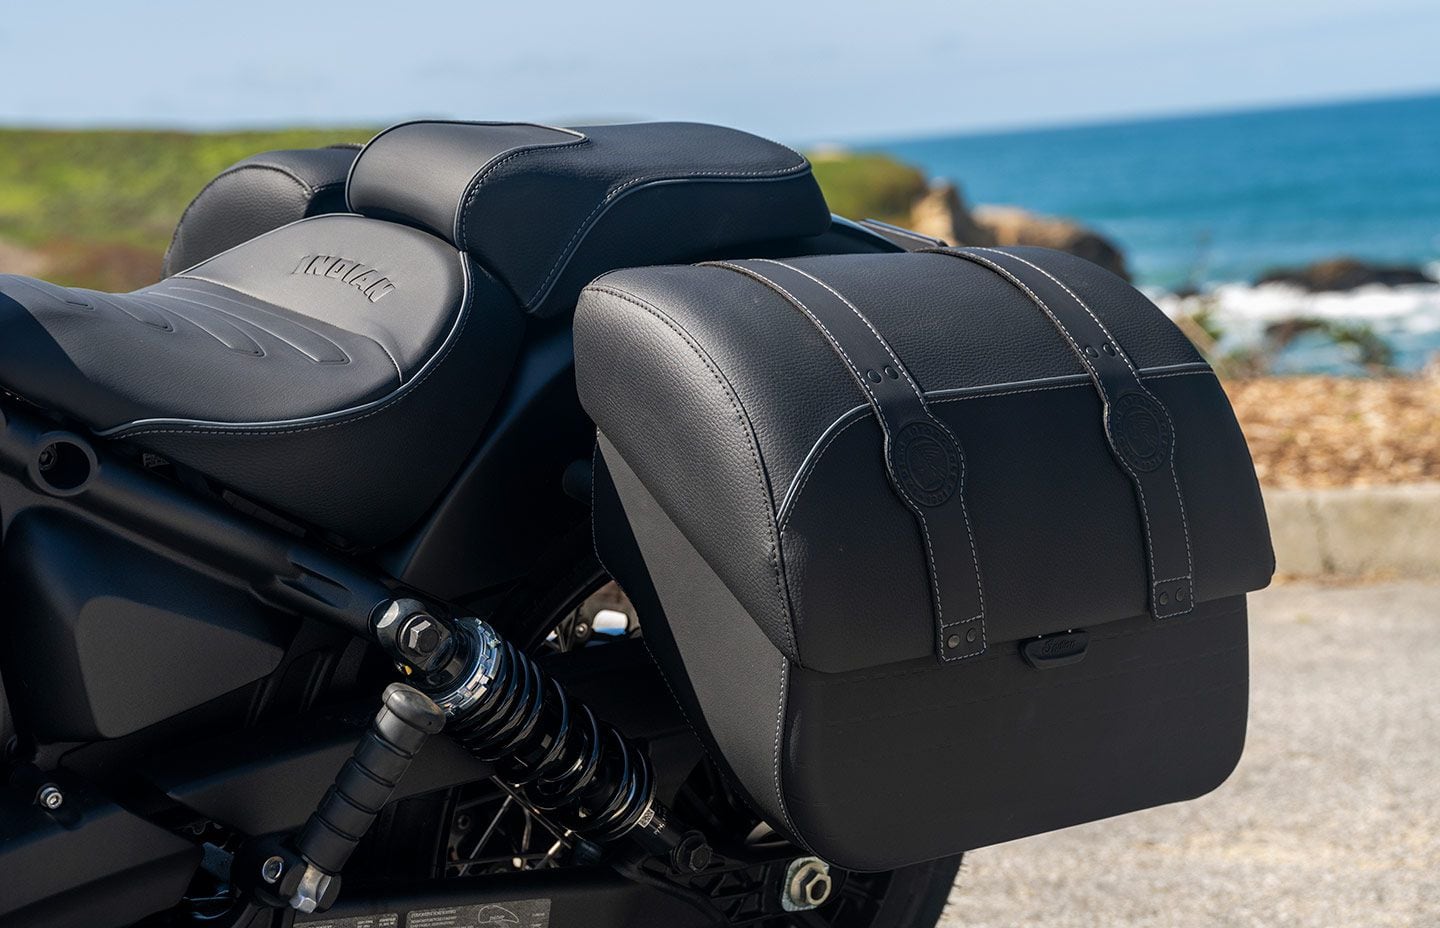 The 2025 Indian Super Scout gets saddlebags and a passenger seat as standard. The pull tap makes it easy to get into the bags.